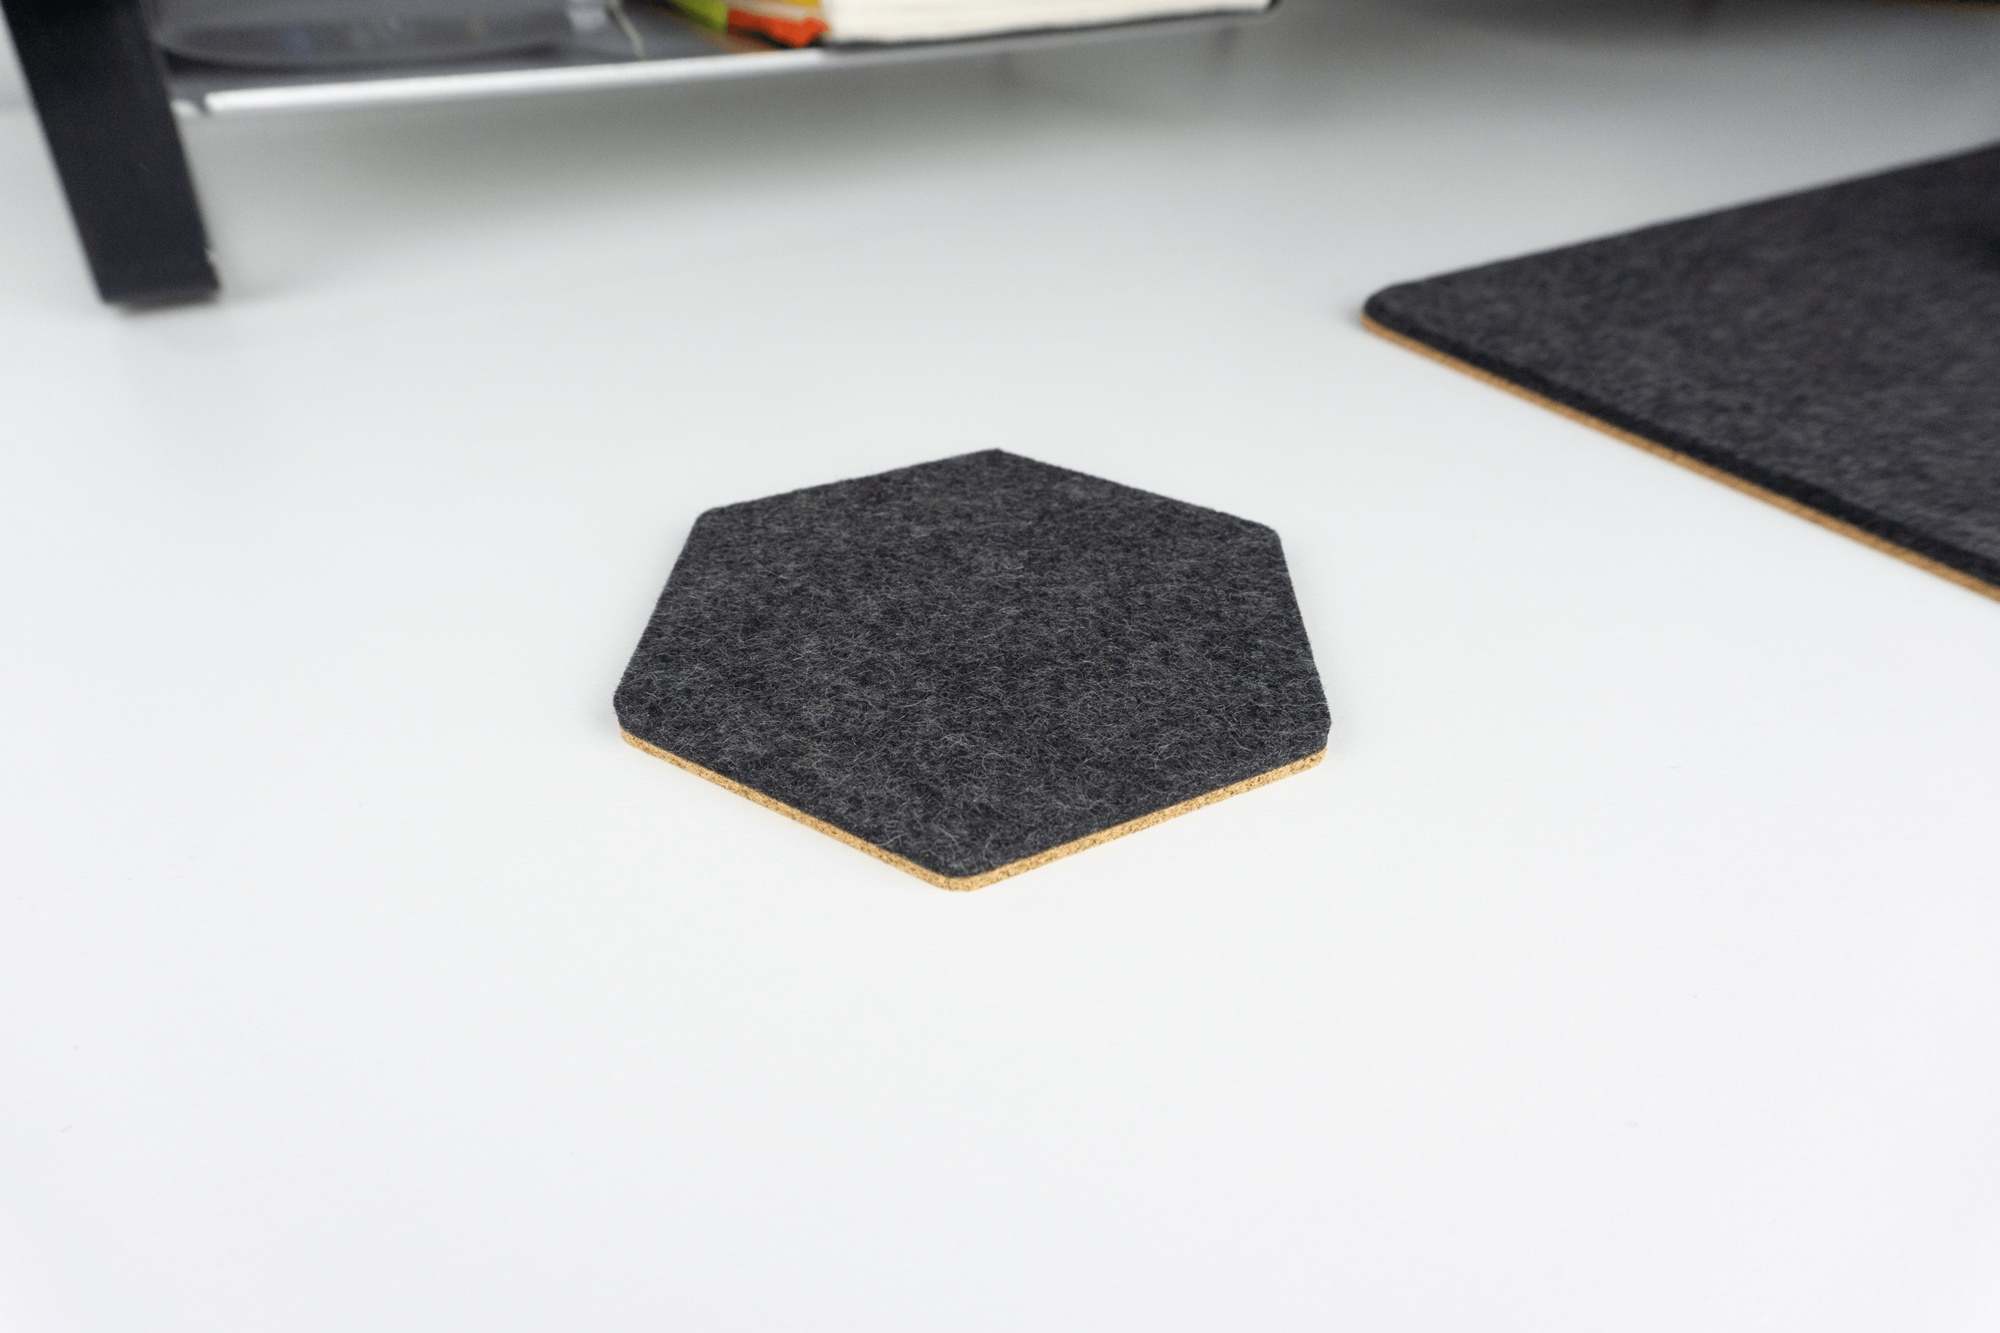 A closeup of a black hexagon coaster on a white desk next to a matching black wool and cork desk pad.